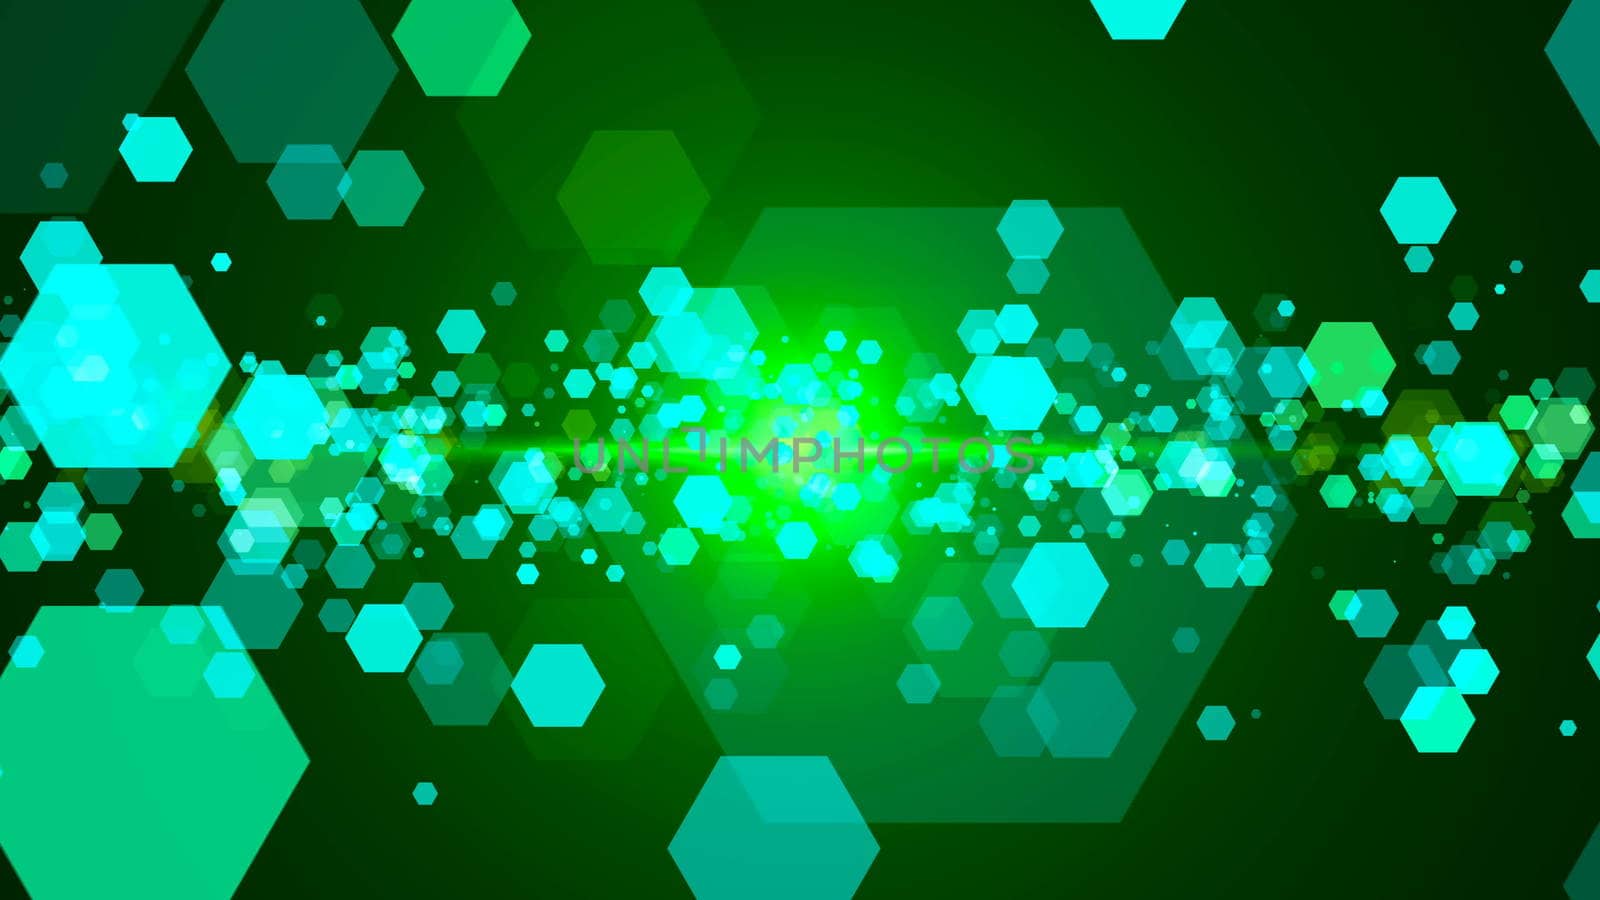 Hexagonal abstract background. Digital illustration by nolimit046